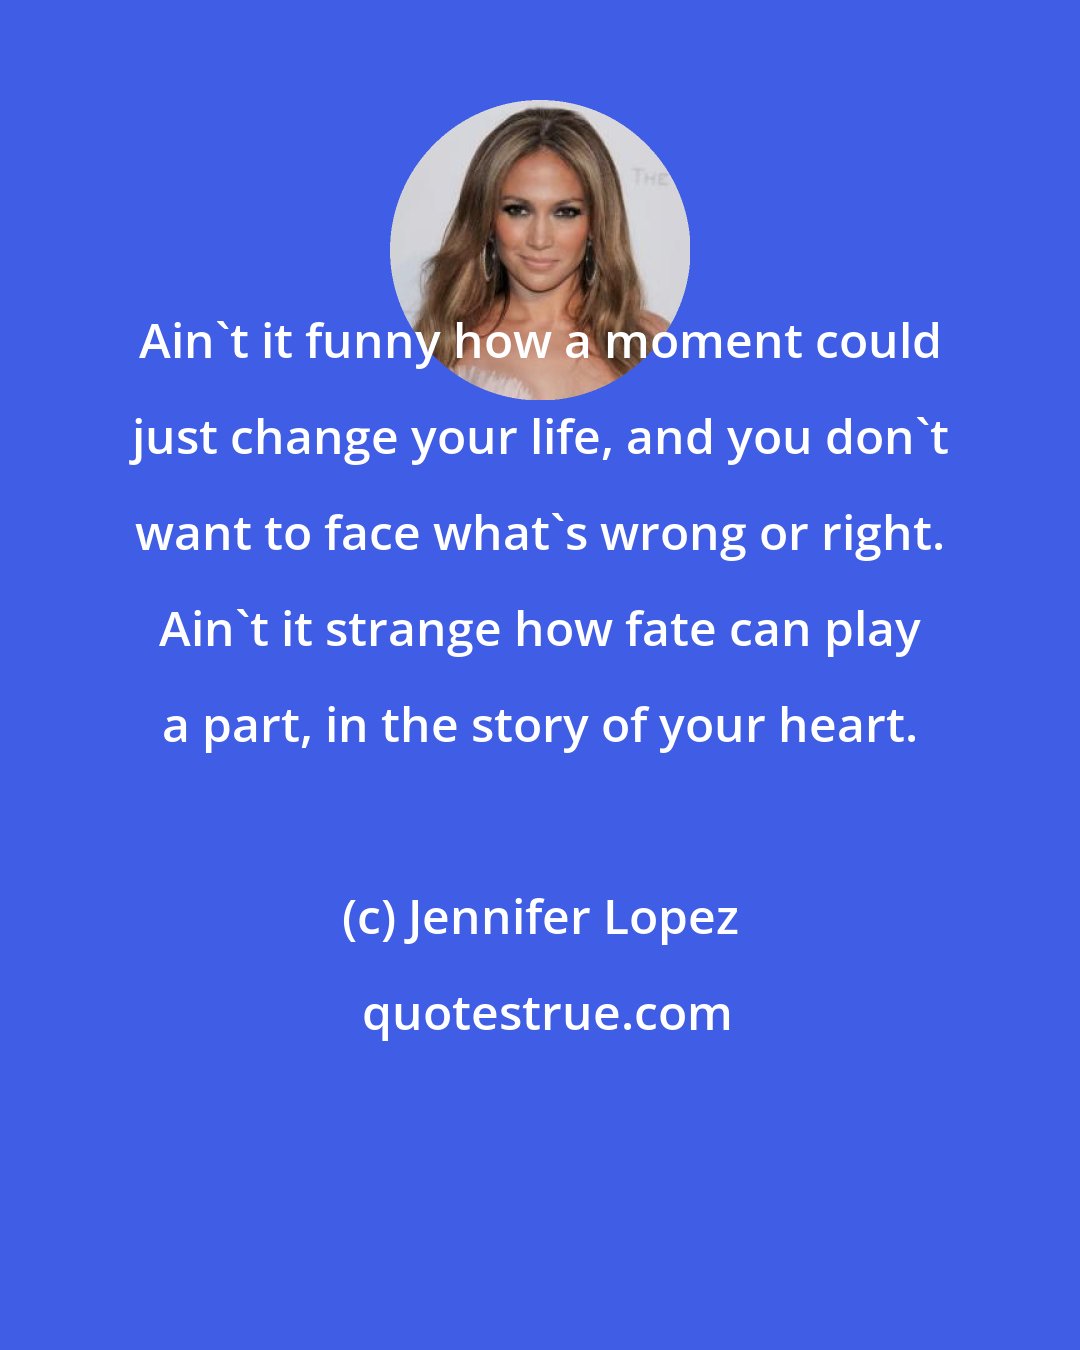 Jennifer Lopez: Ain't it funny how a moment could just change your life, and you don't want to face what's wrong or right. Ain't it strange how fate can play a part, in the story of your heart.